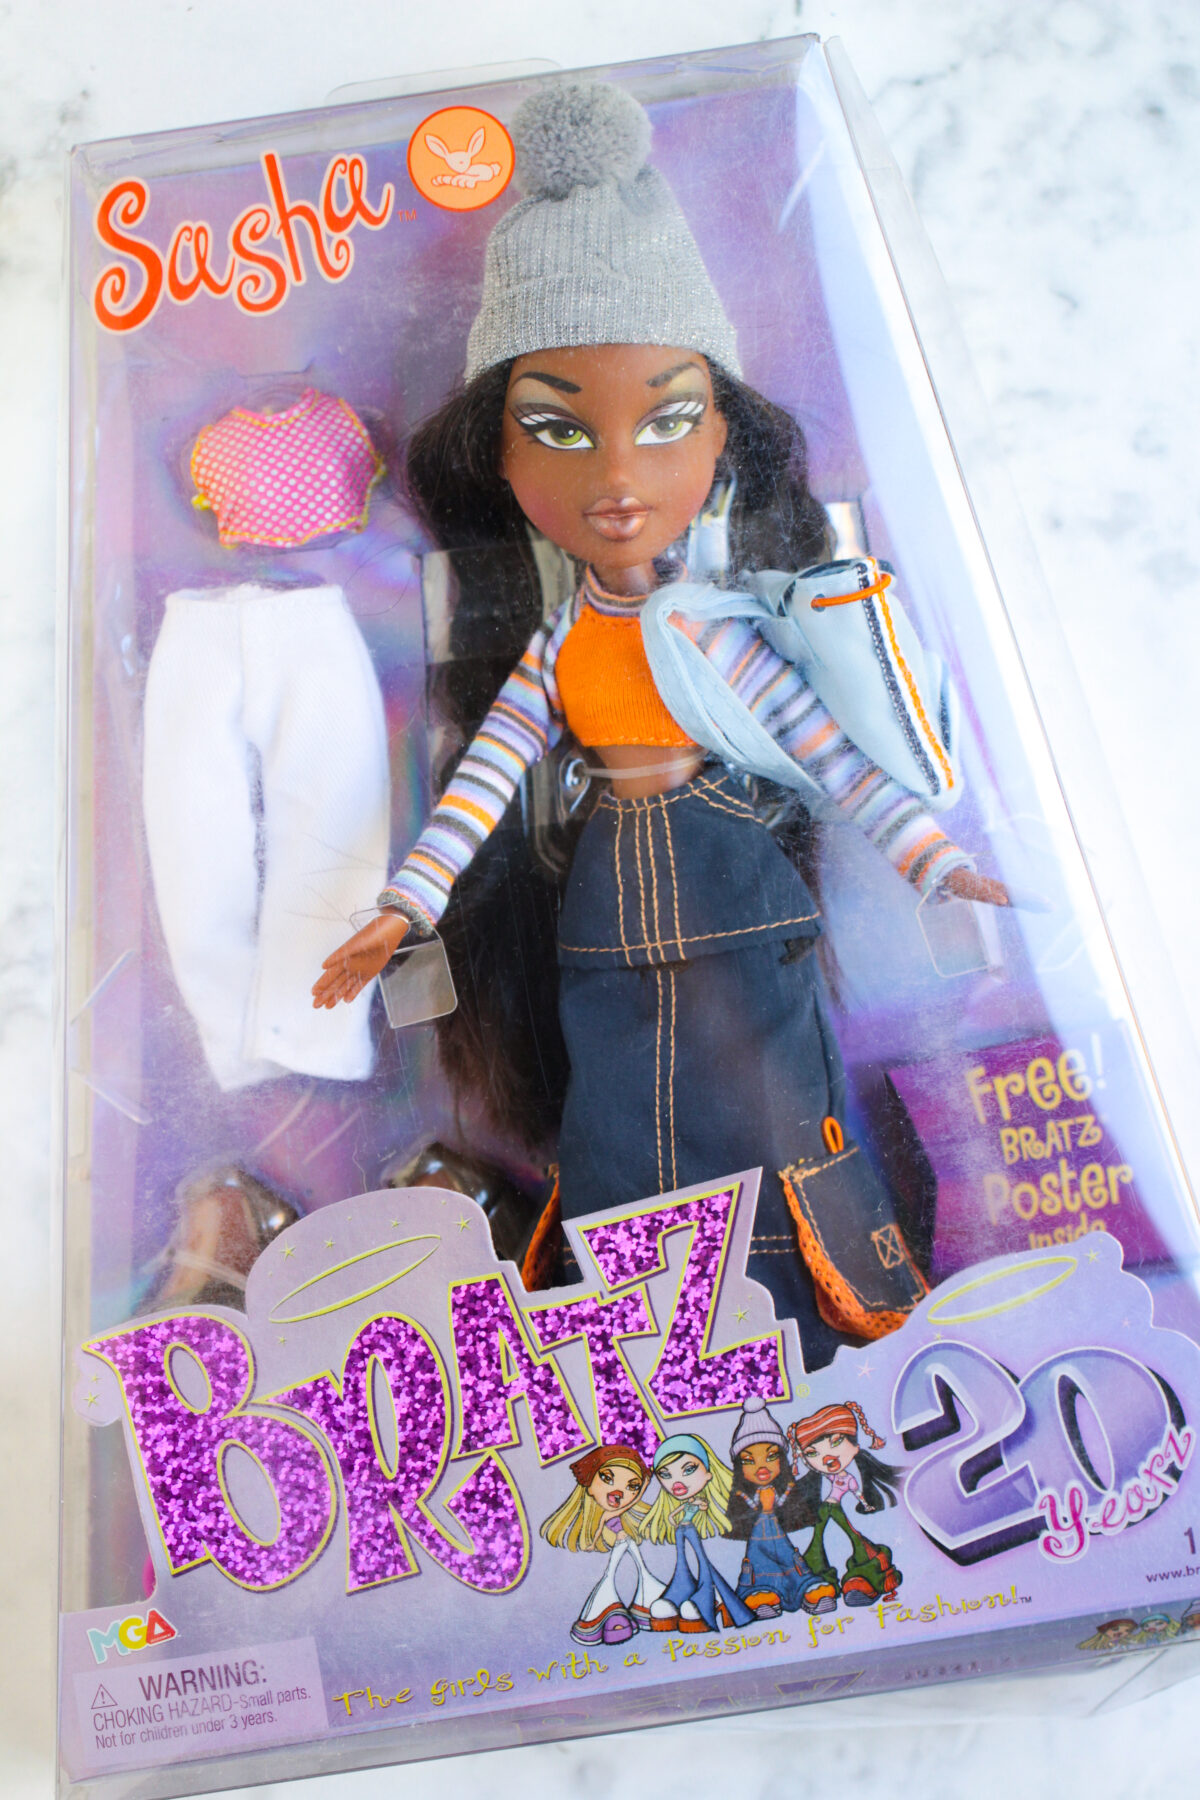 With the release of Bratz 20 Yearz Special Edition Original Fashion Dolls, you can collect near exact replicas of the original 4 dolls.